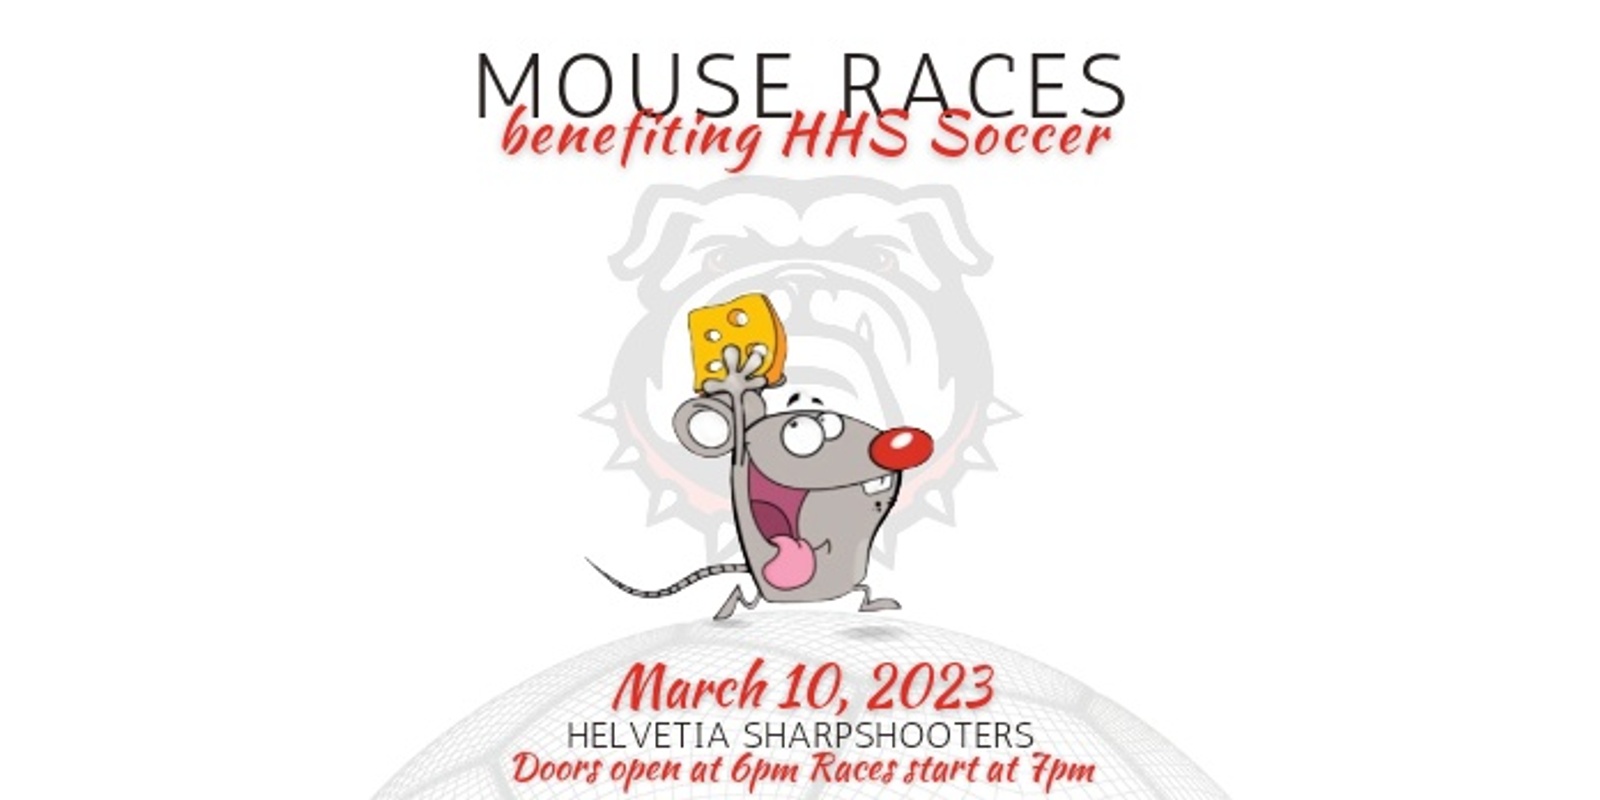 Banner image for HHS Soccer MOUSE RACES